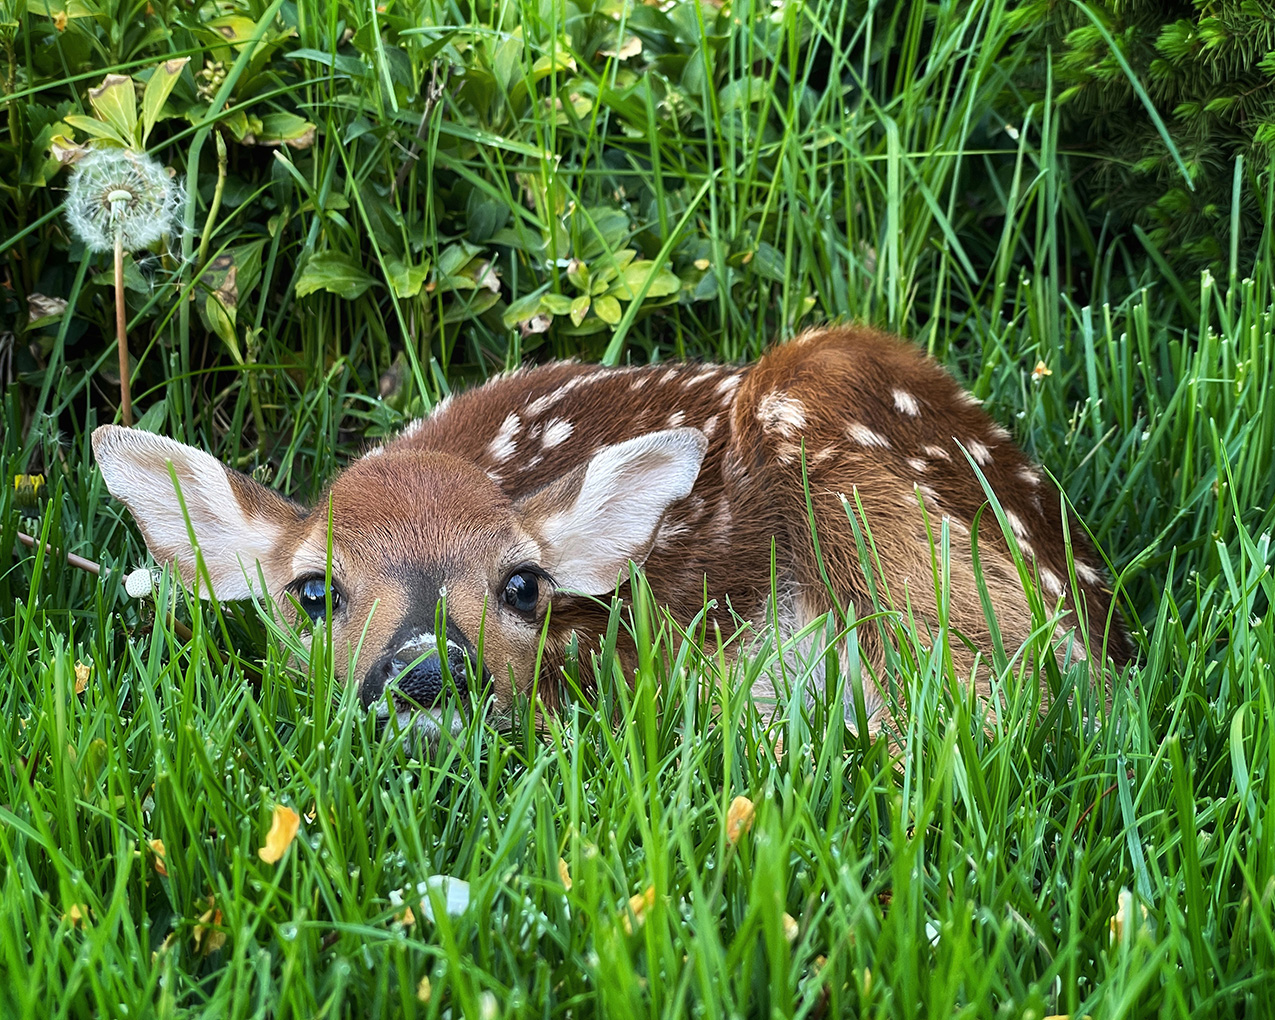 a tiny fawn lies curled up in the grass, looking at the camera